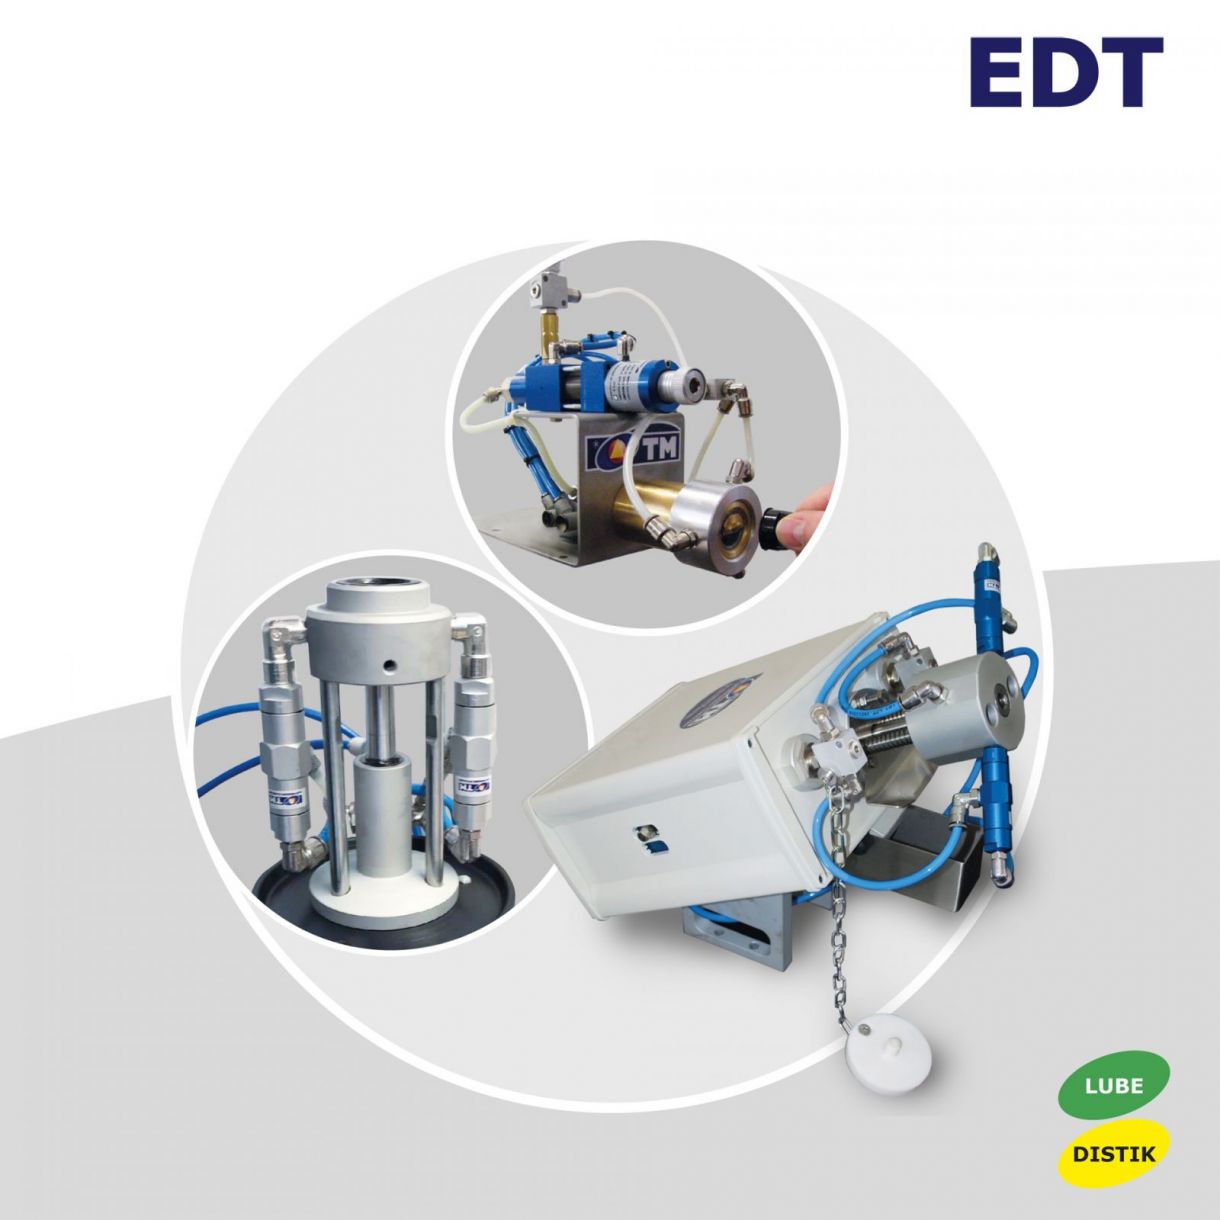 TABLE-TOP DOSING SYSTEMS (EDT)